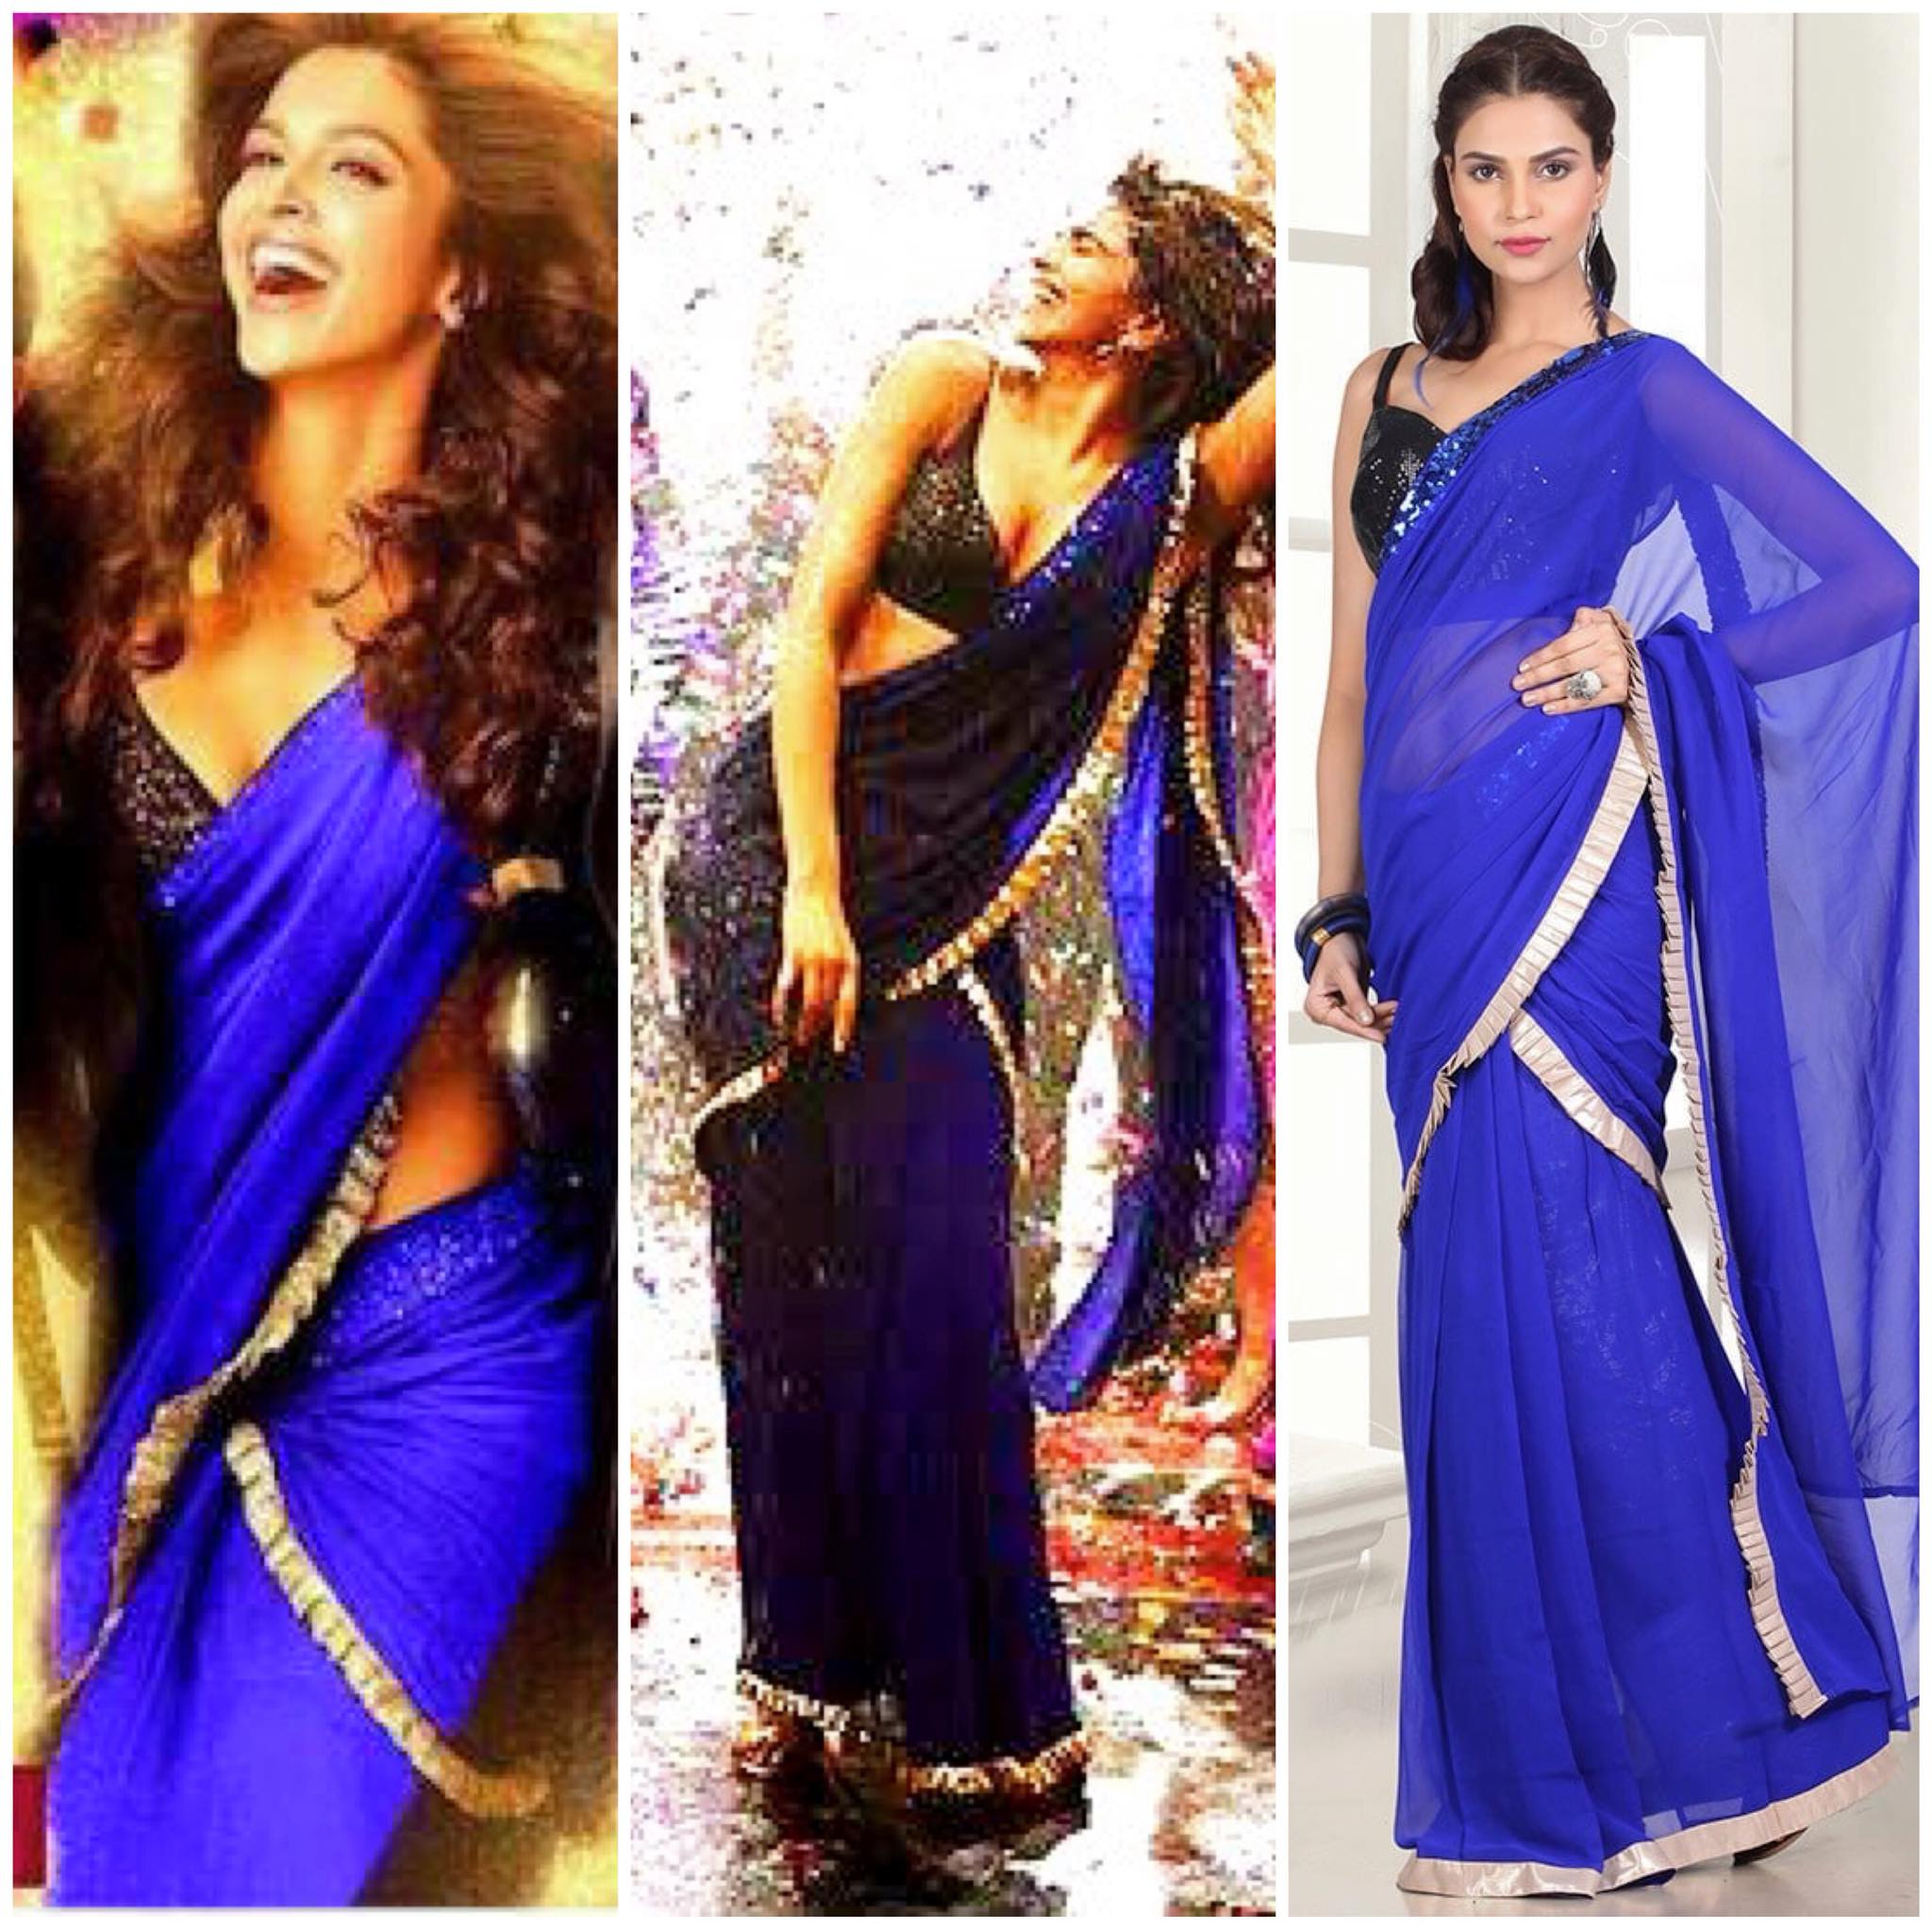 Latest Saree Draping Styles for Different Occasions: Classic